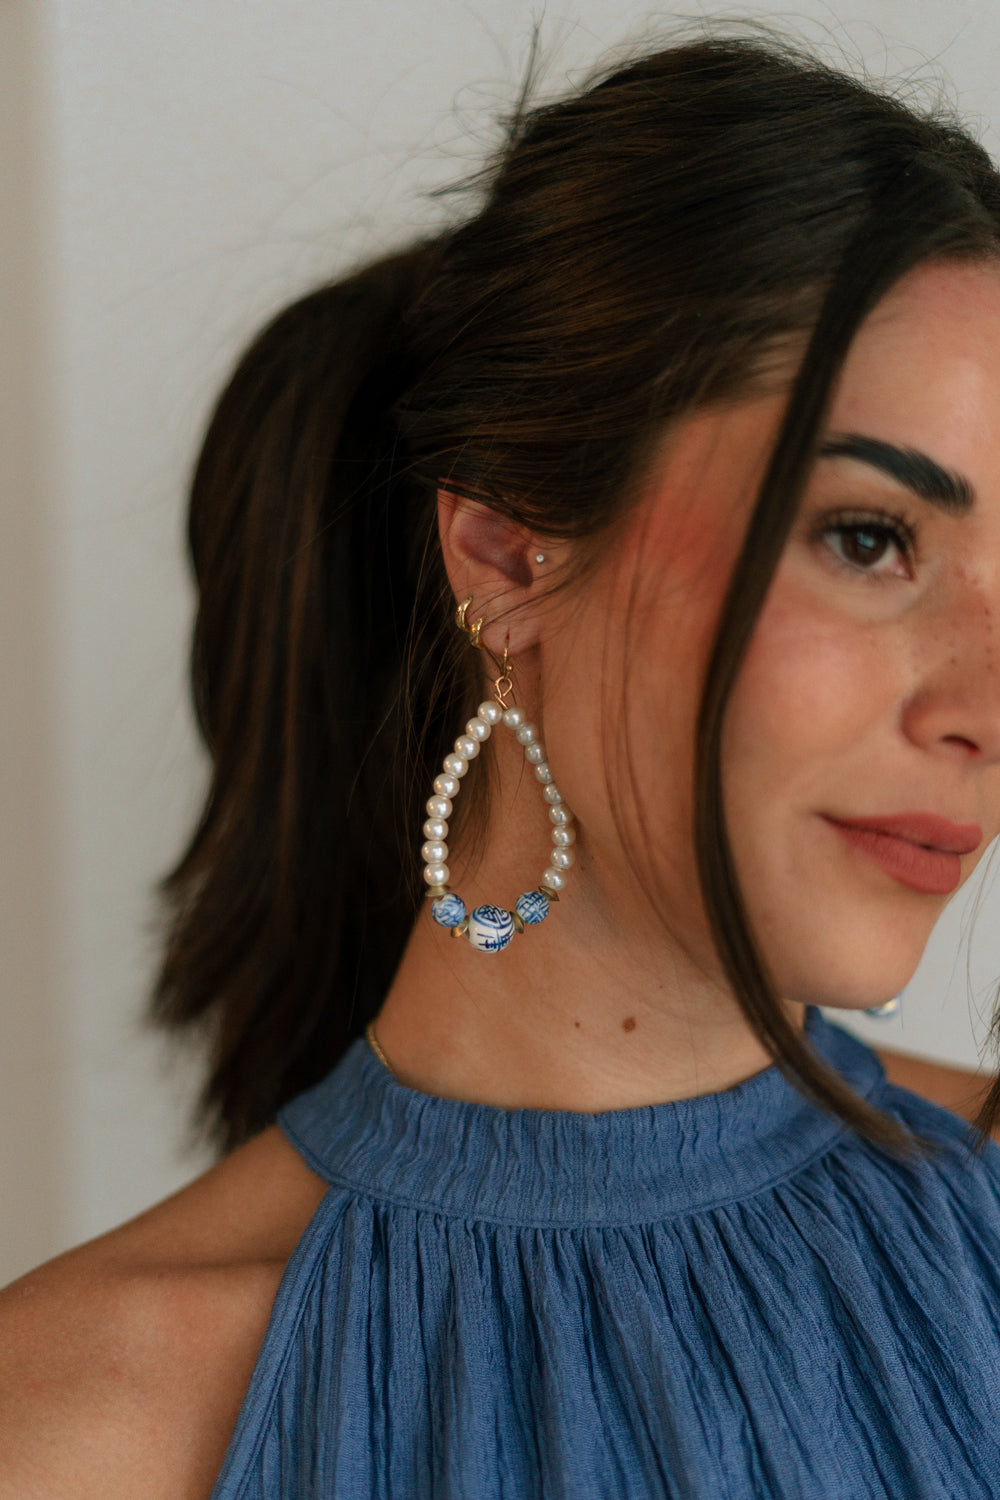 SIde view of female model wearing the Sienna White & Blue Pearl Dangle Earring which features teardrop, dangle earrings with white pearls and blue design beads